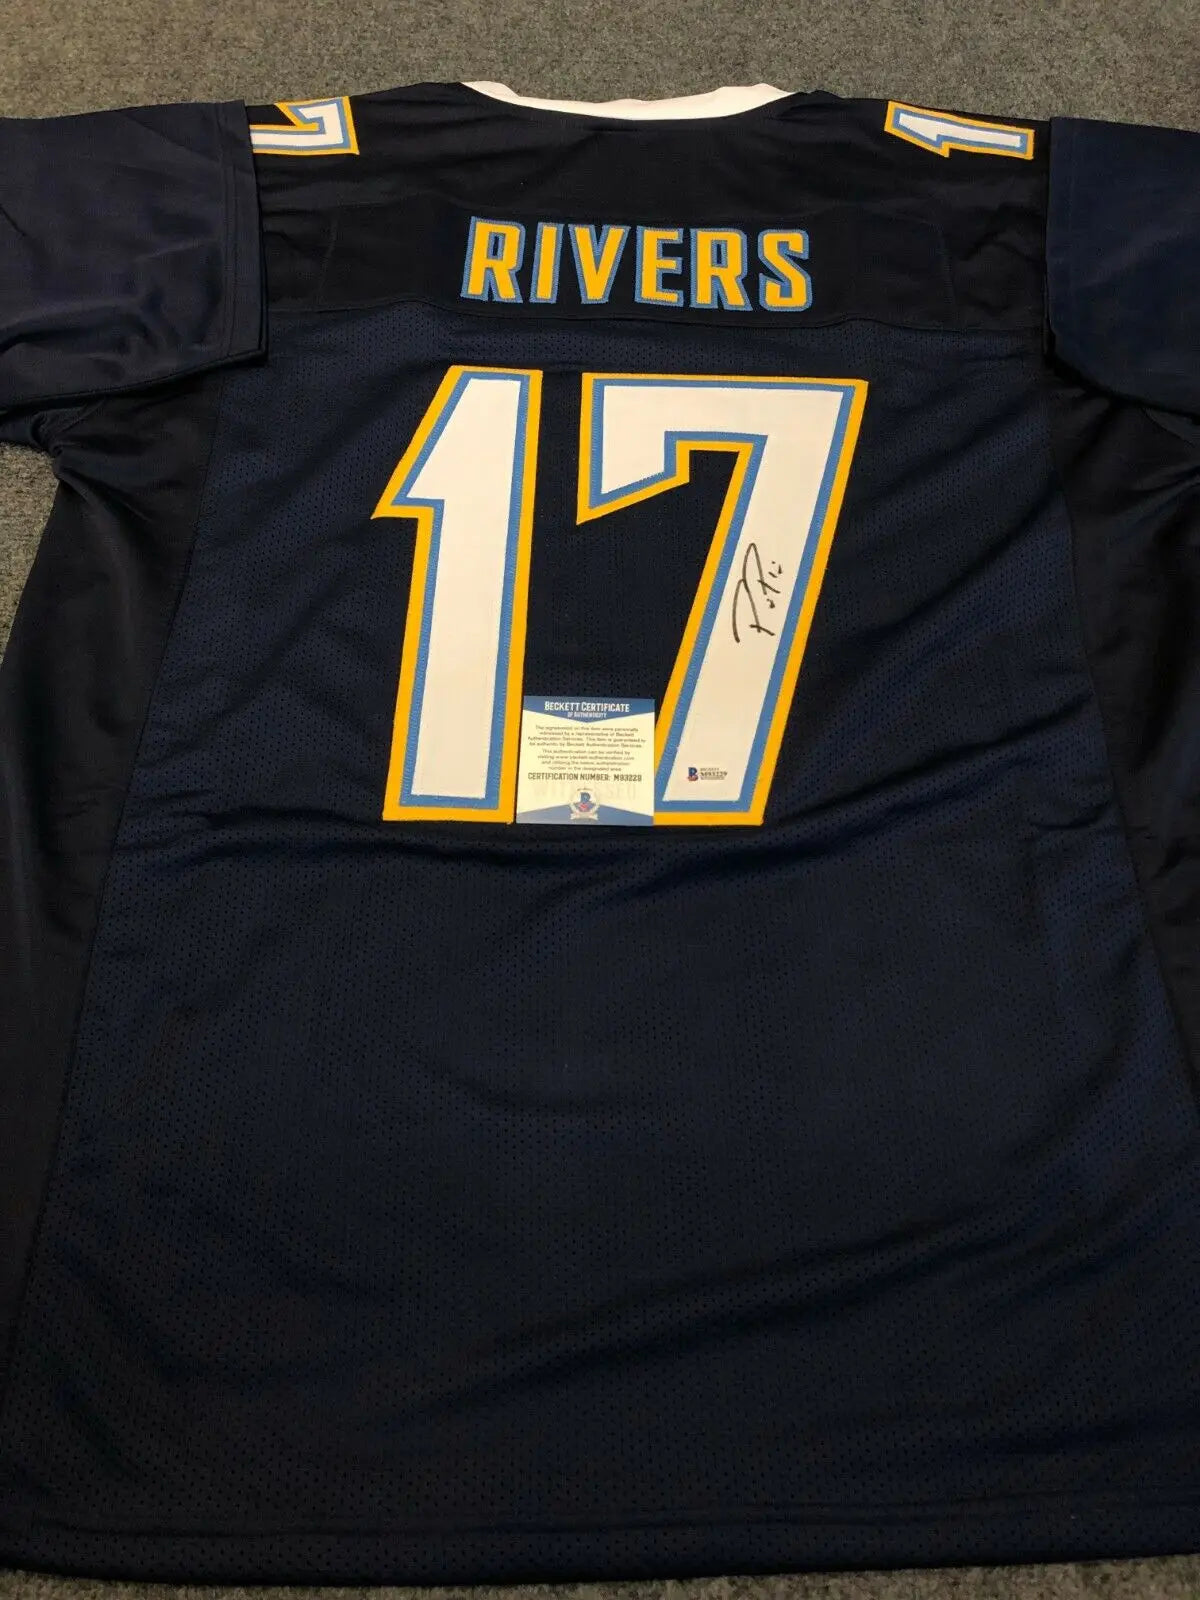 philip rivers autographed jersey